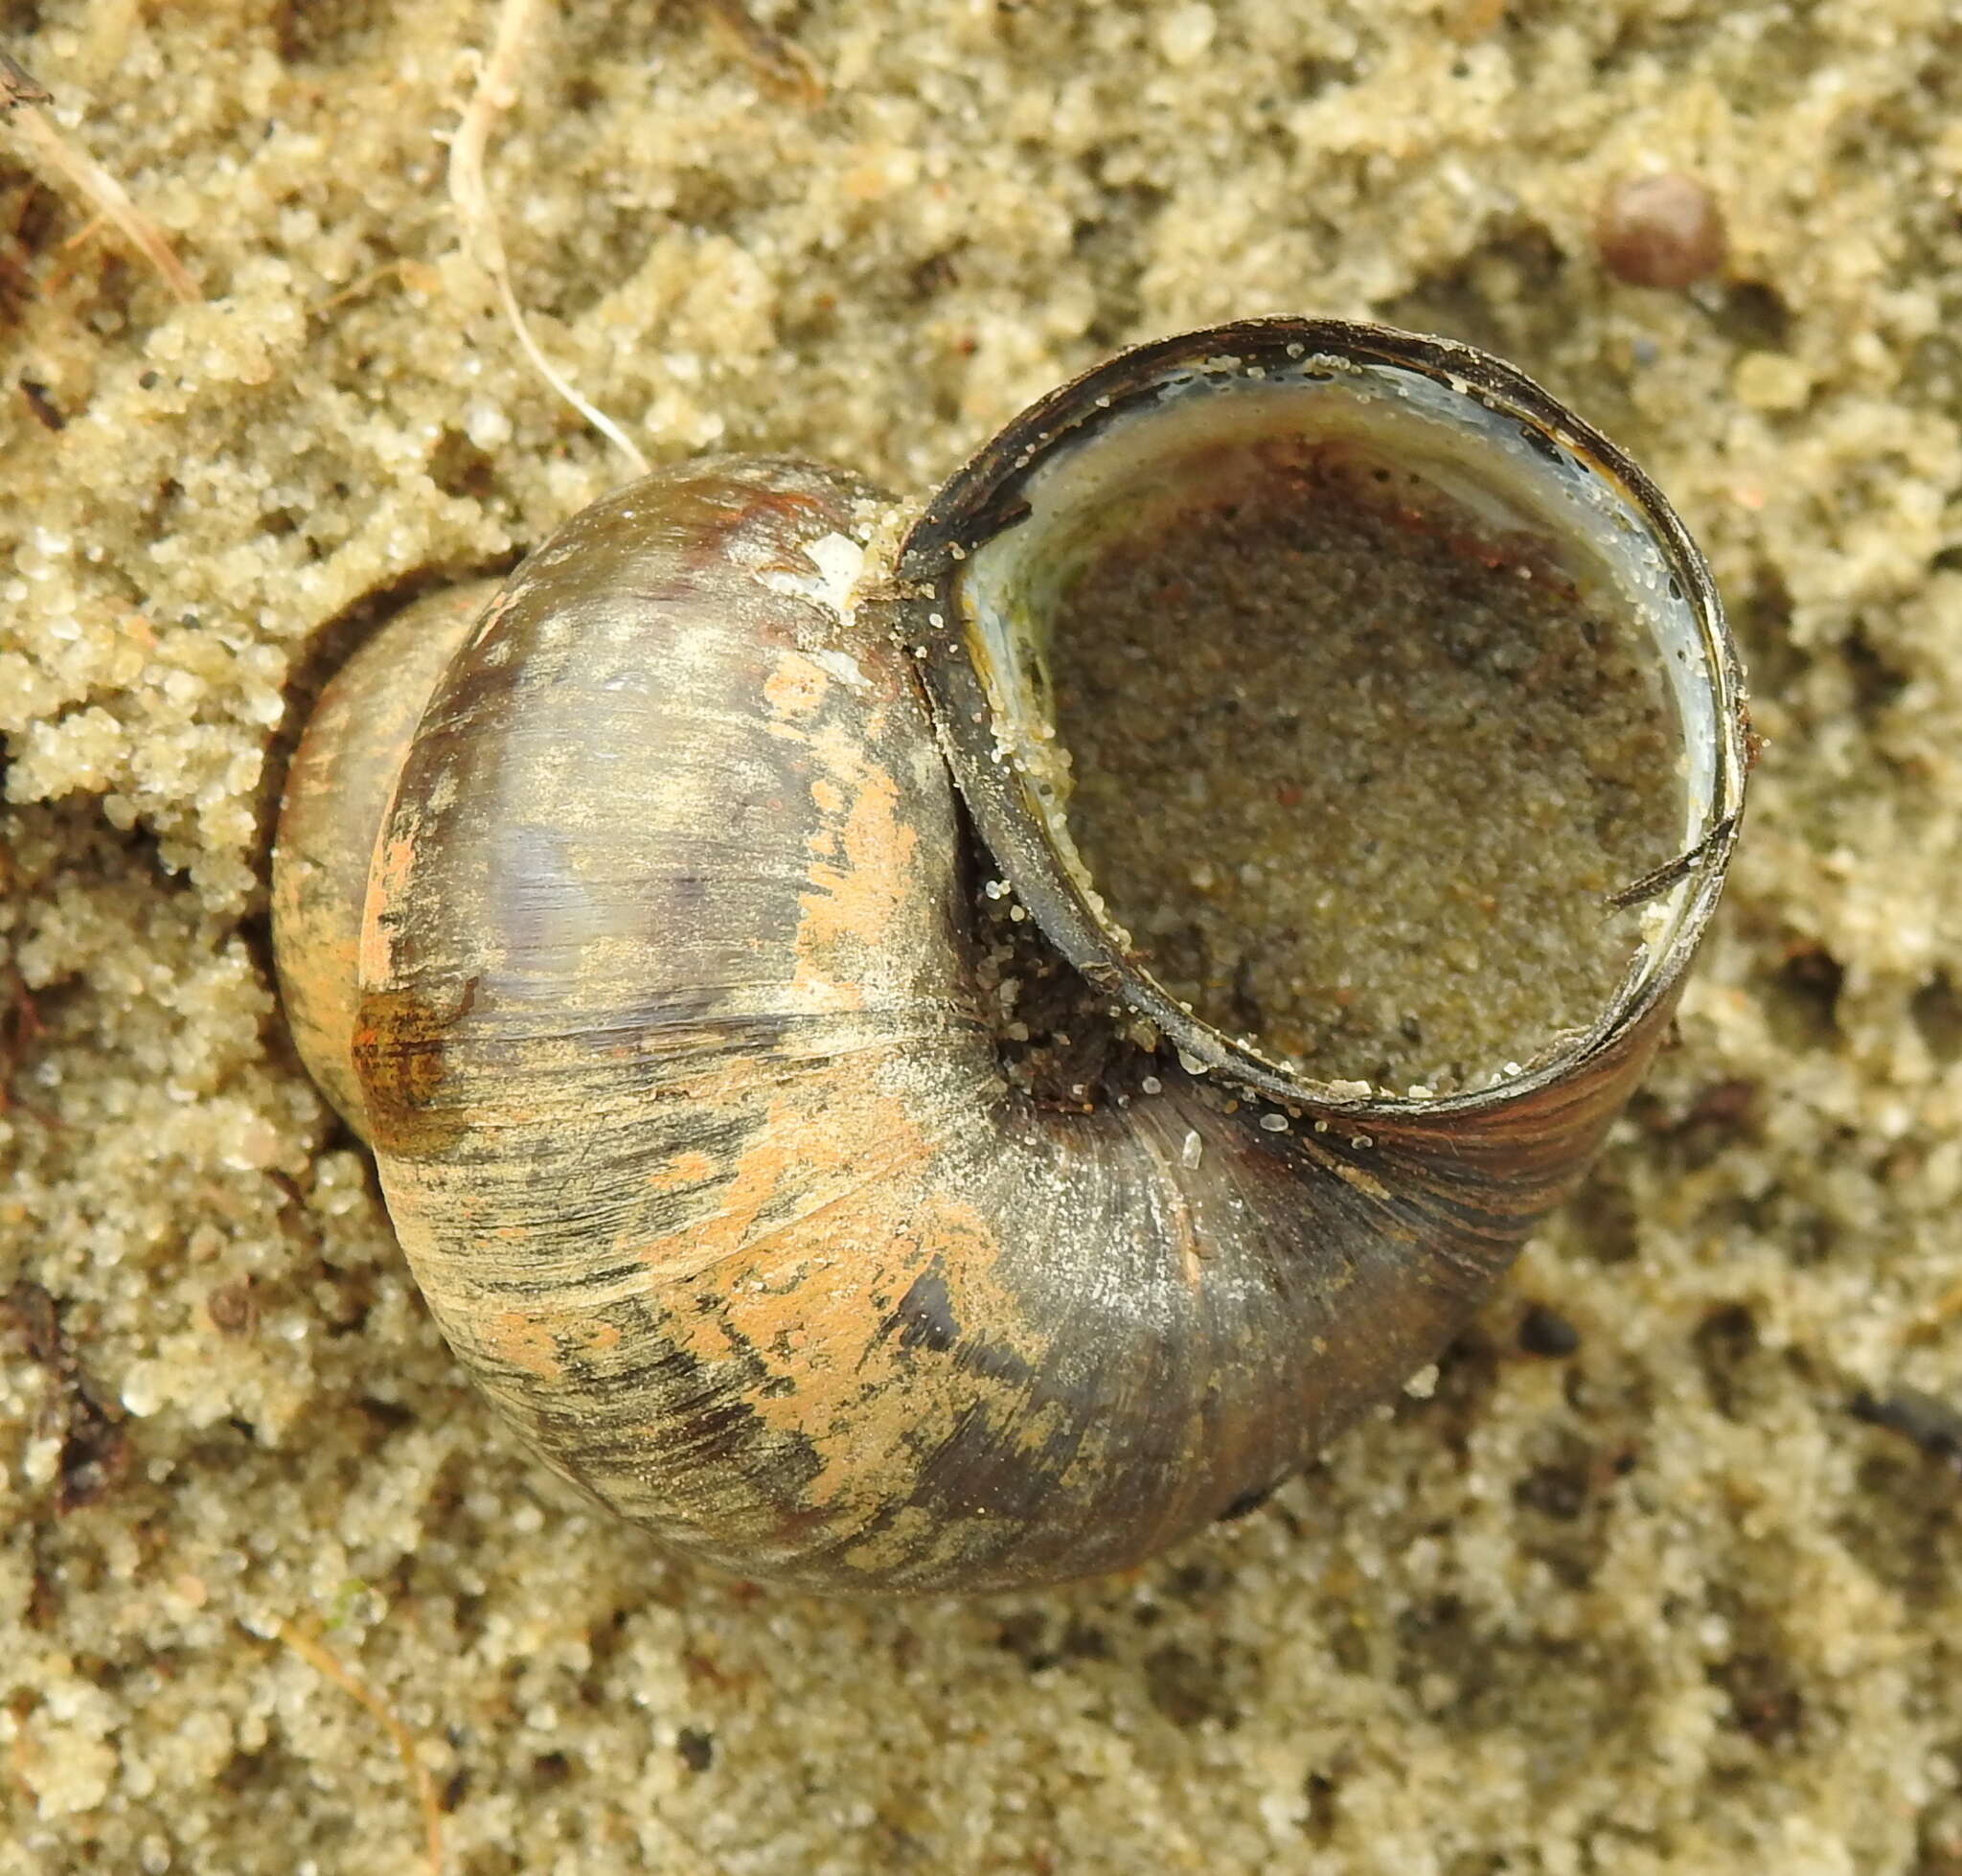 Image of Lister's River Snail